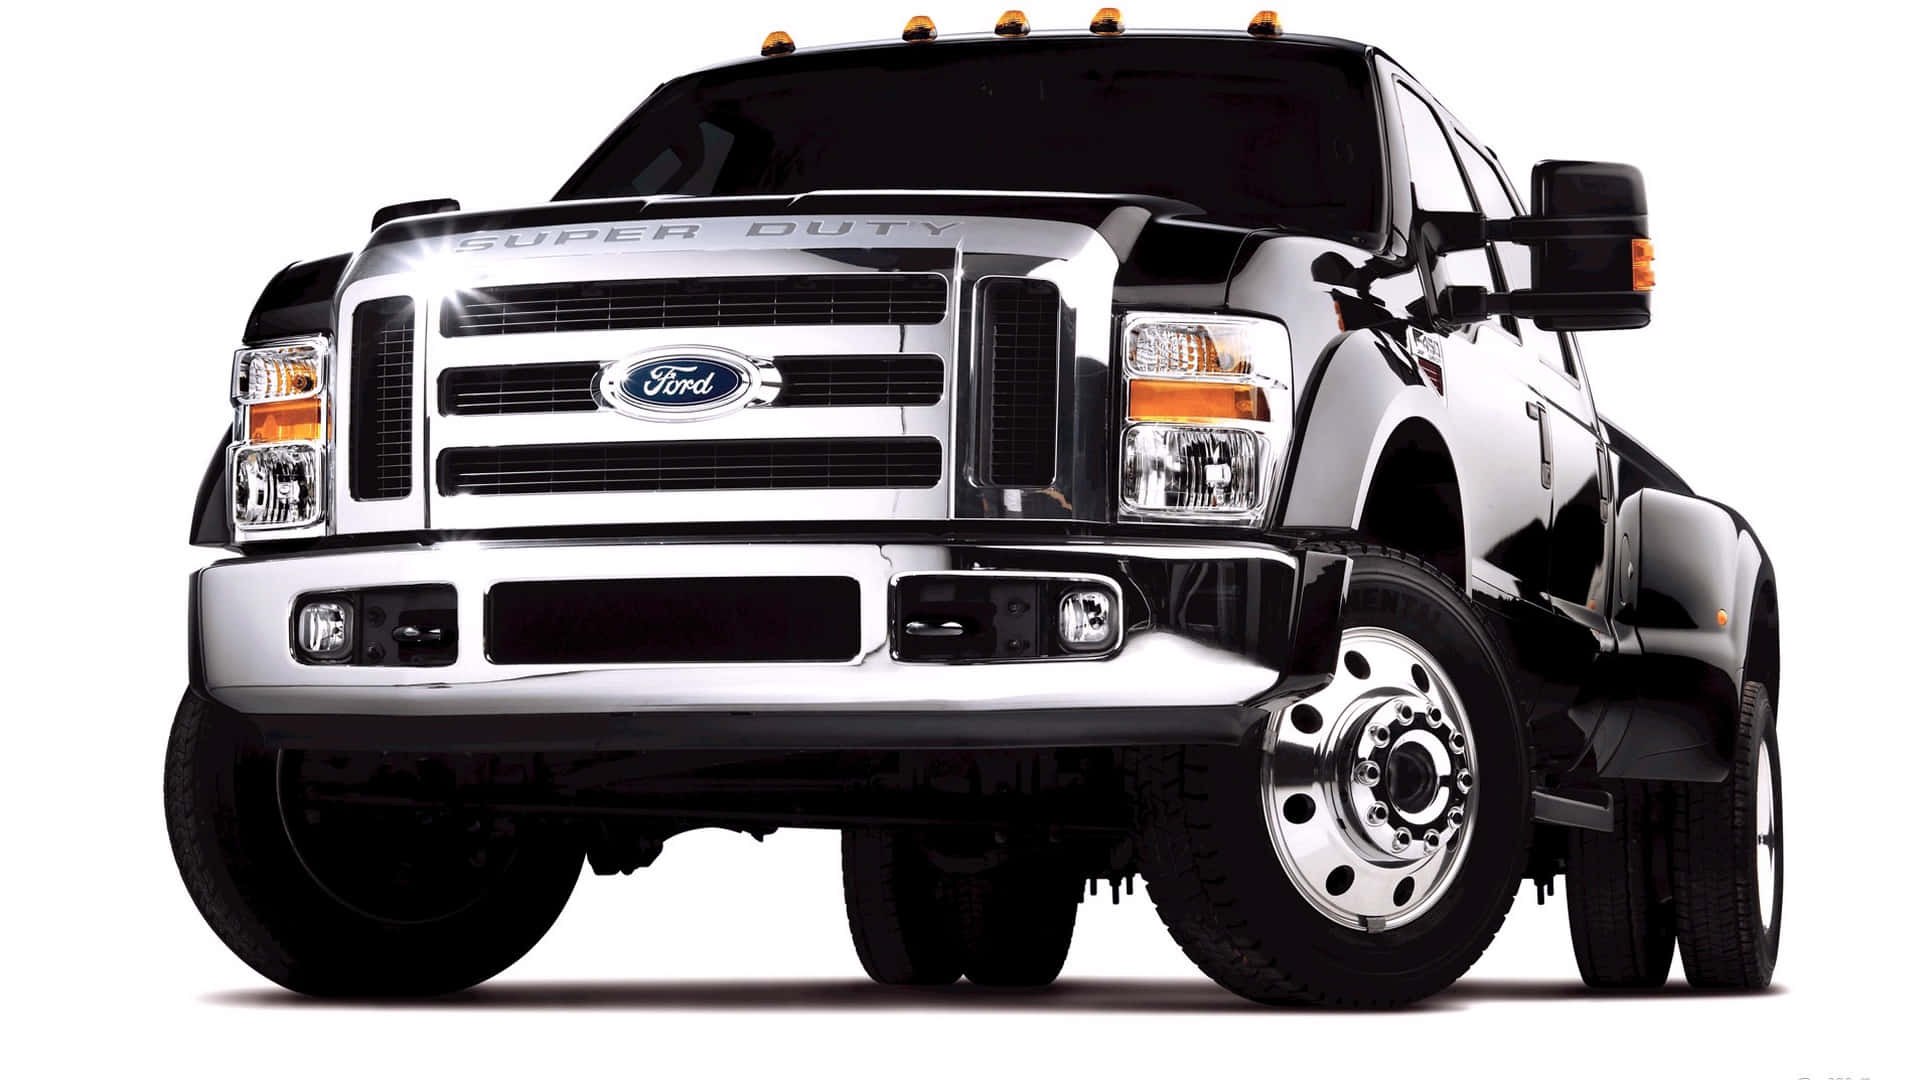 A Black Truck Is Shown On A White Background